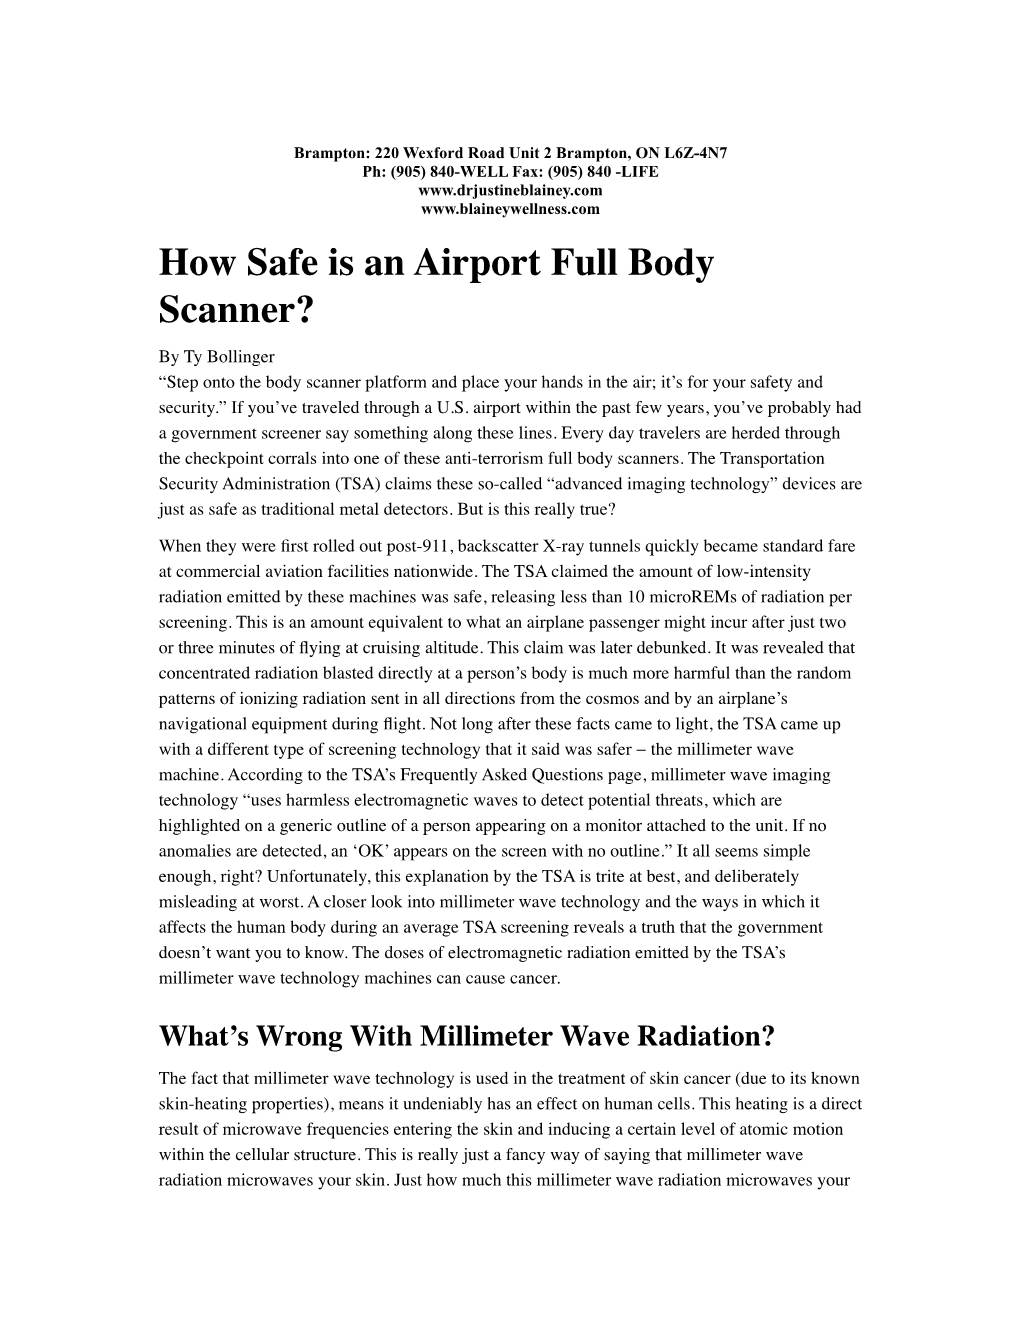 How Safe Is an Airport Full Body Scanner?